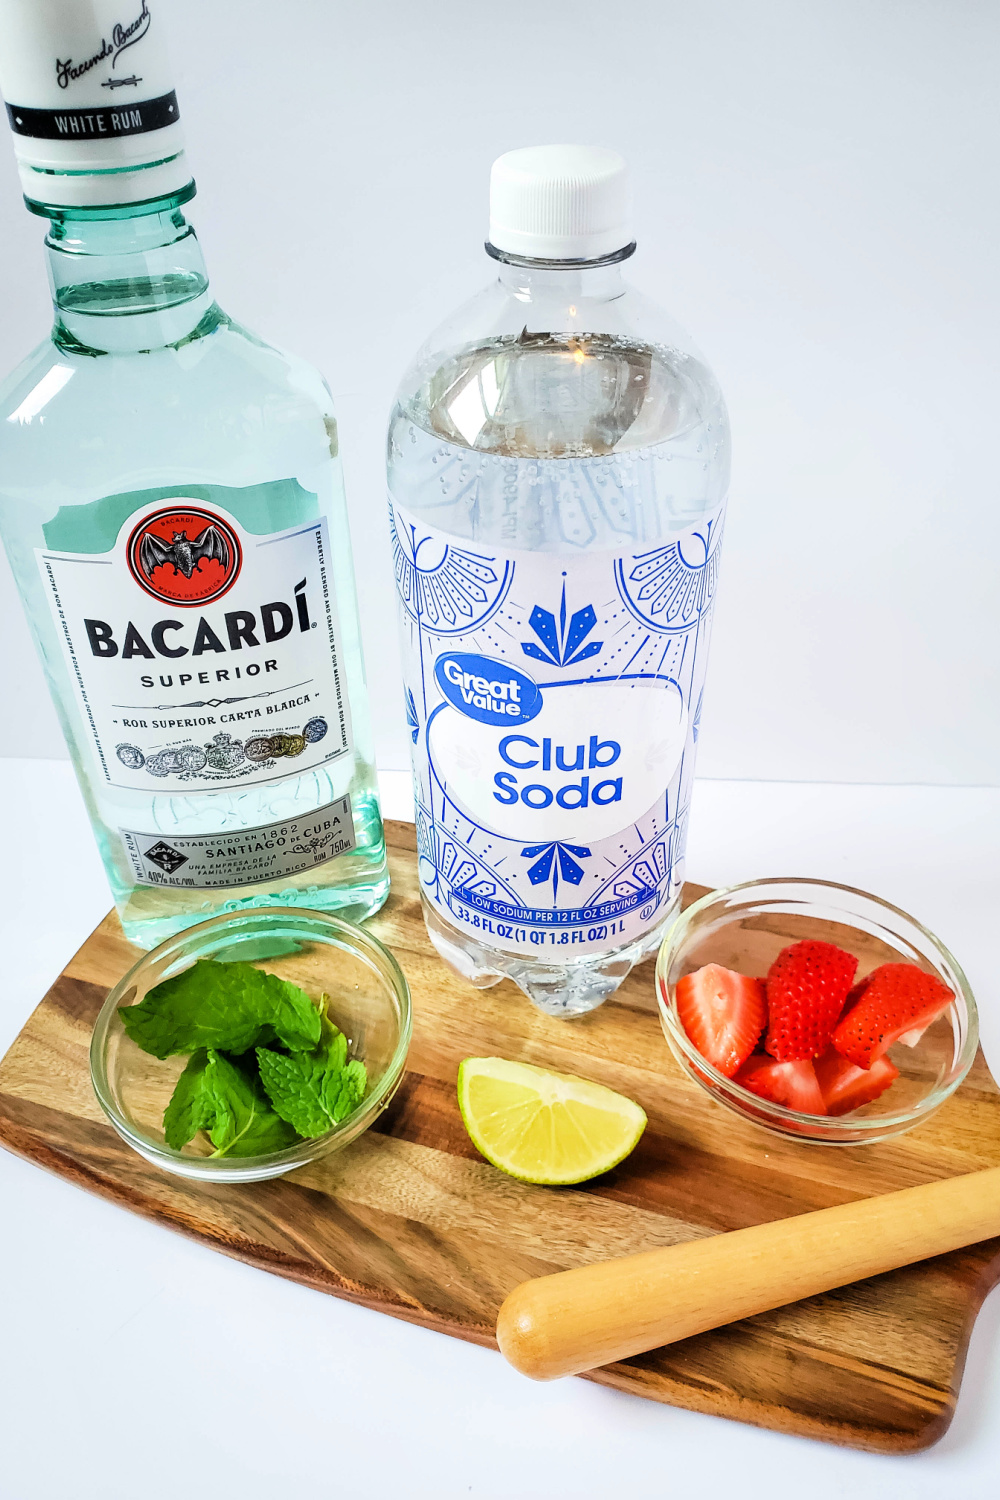 All the ingrediants to make a strawberry mojito. Rum, club soda, mint, strawberries and a slice of lime sitting on a cutting board.